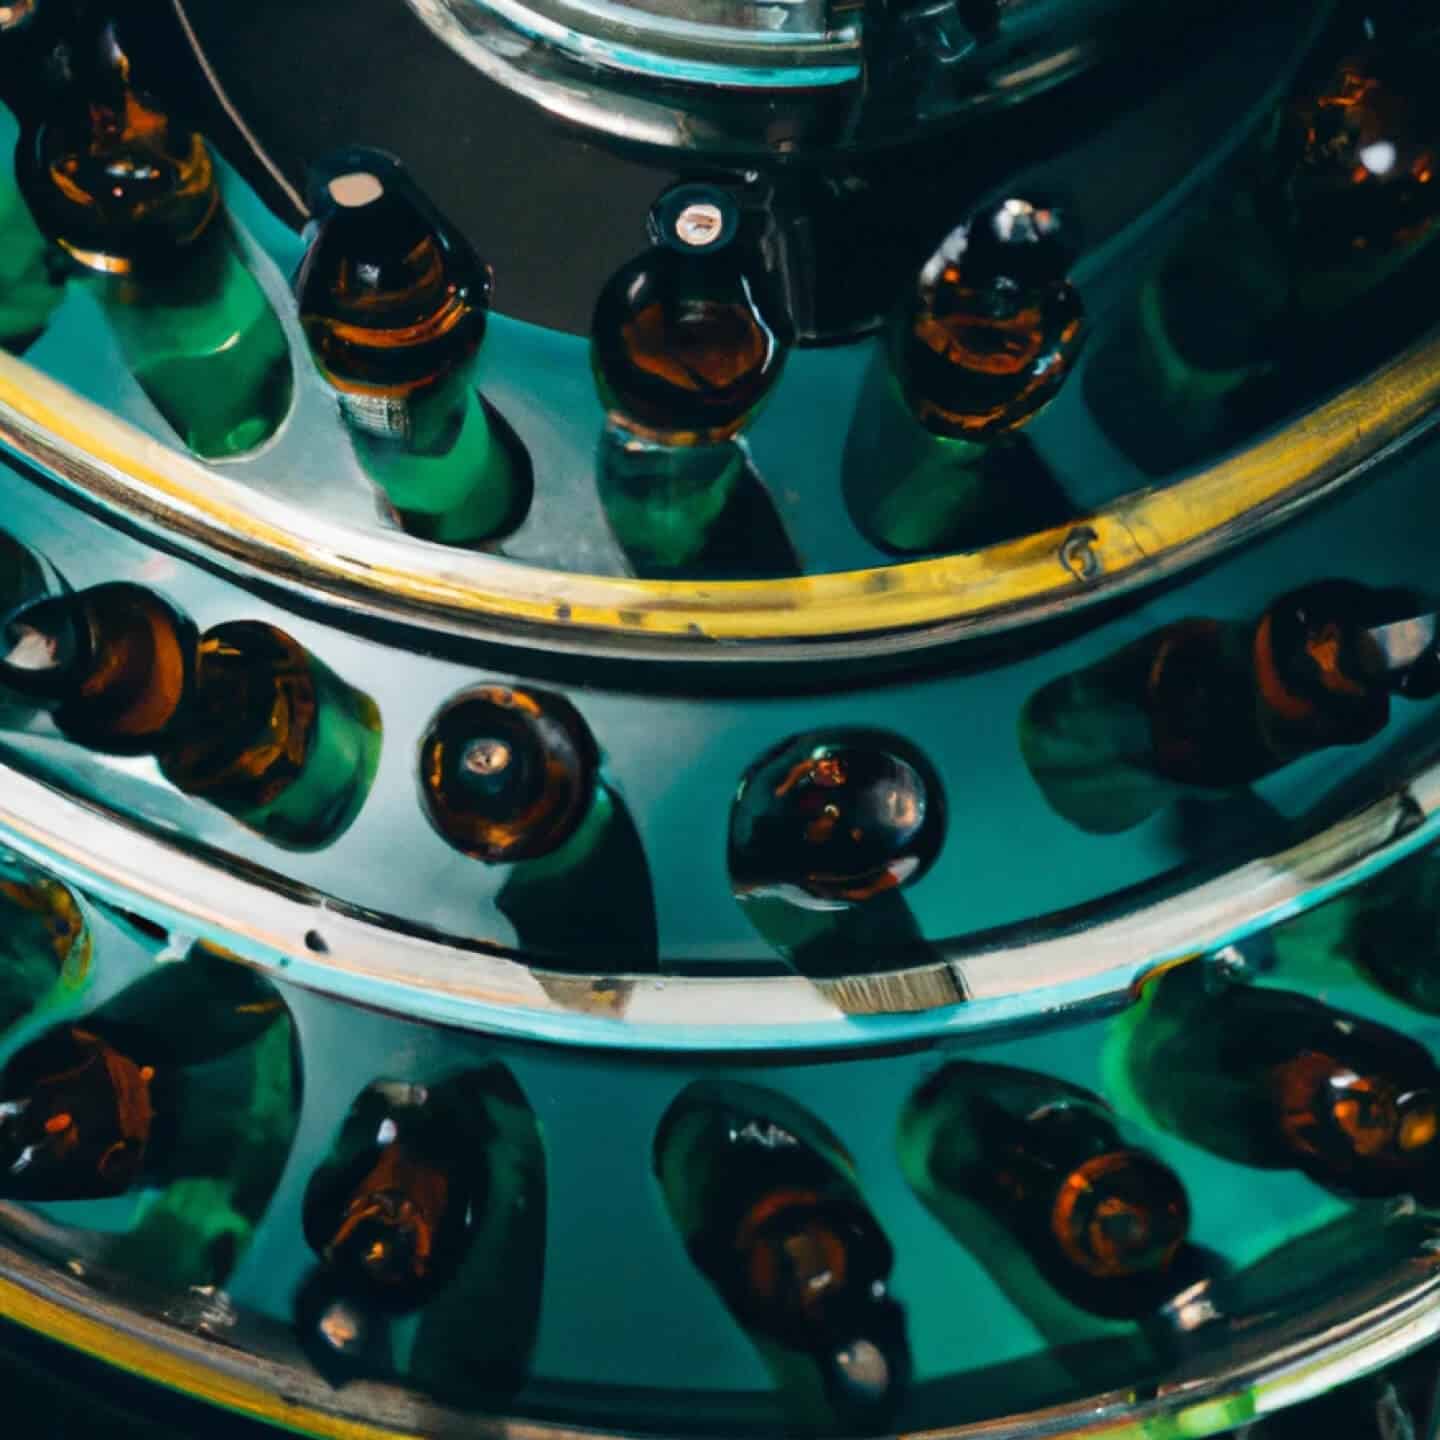 An industrial machine filled with beer bottles.